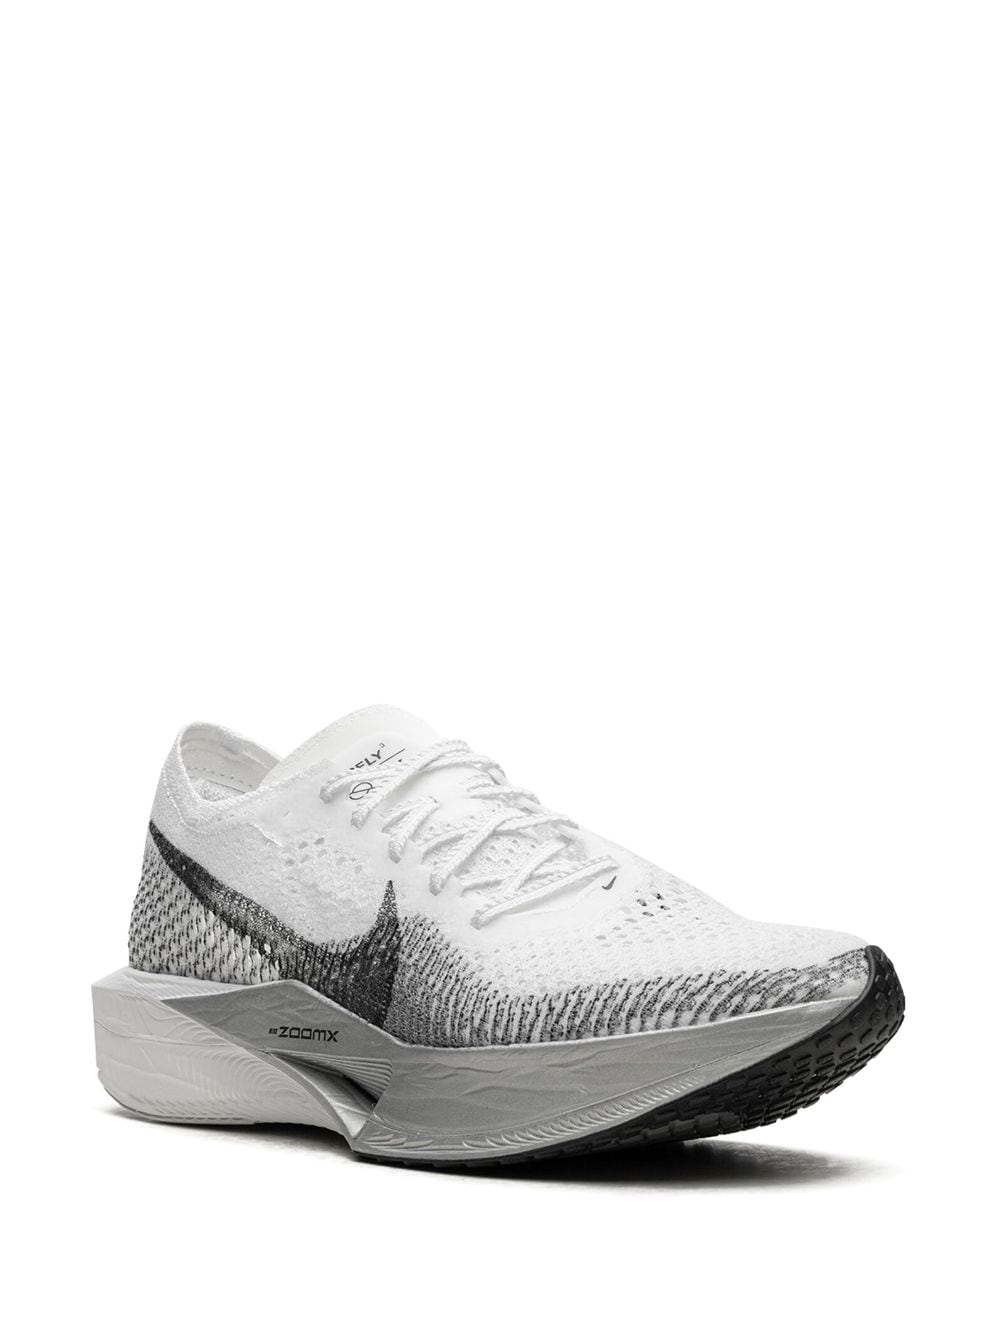 ZOOMX VAPORFLY 3 WHITE PARTICLE GREY 运动鞋